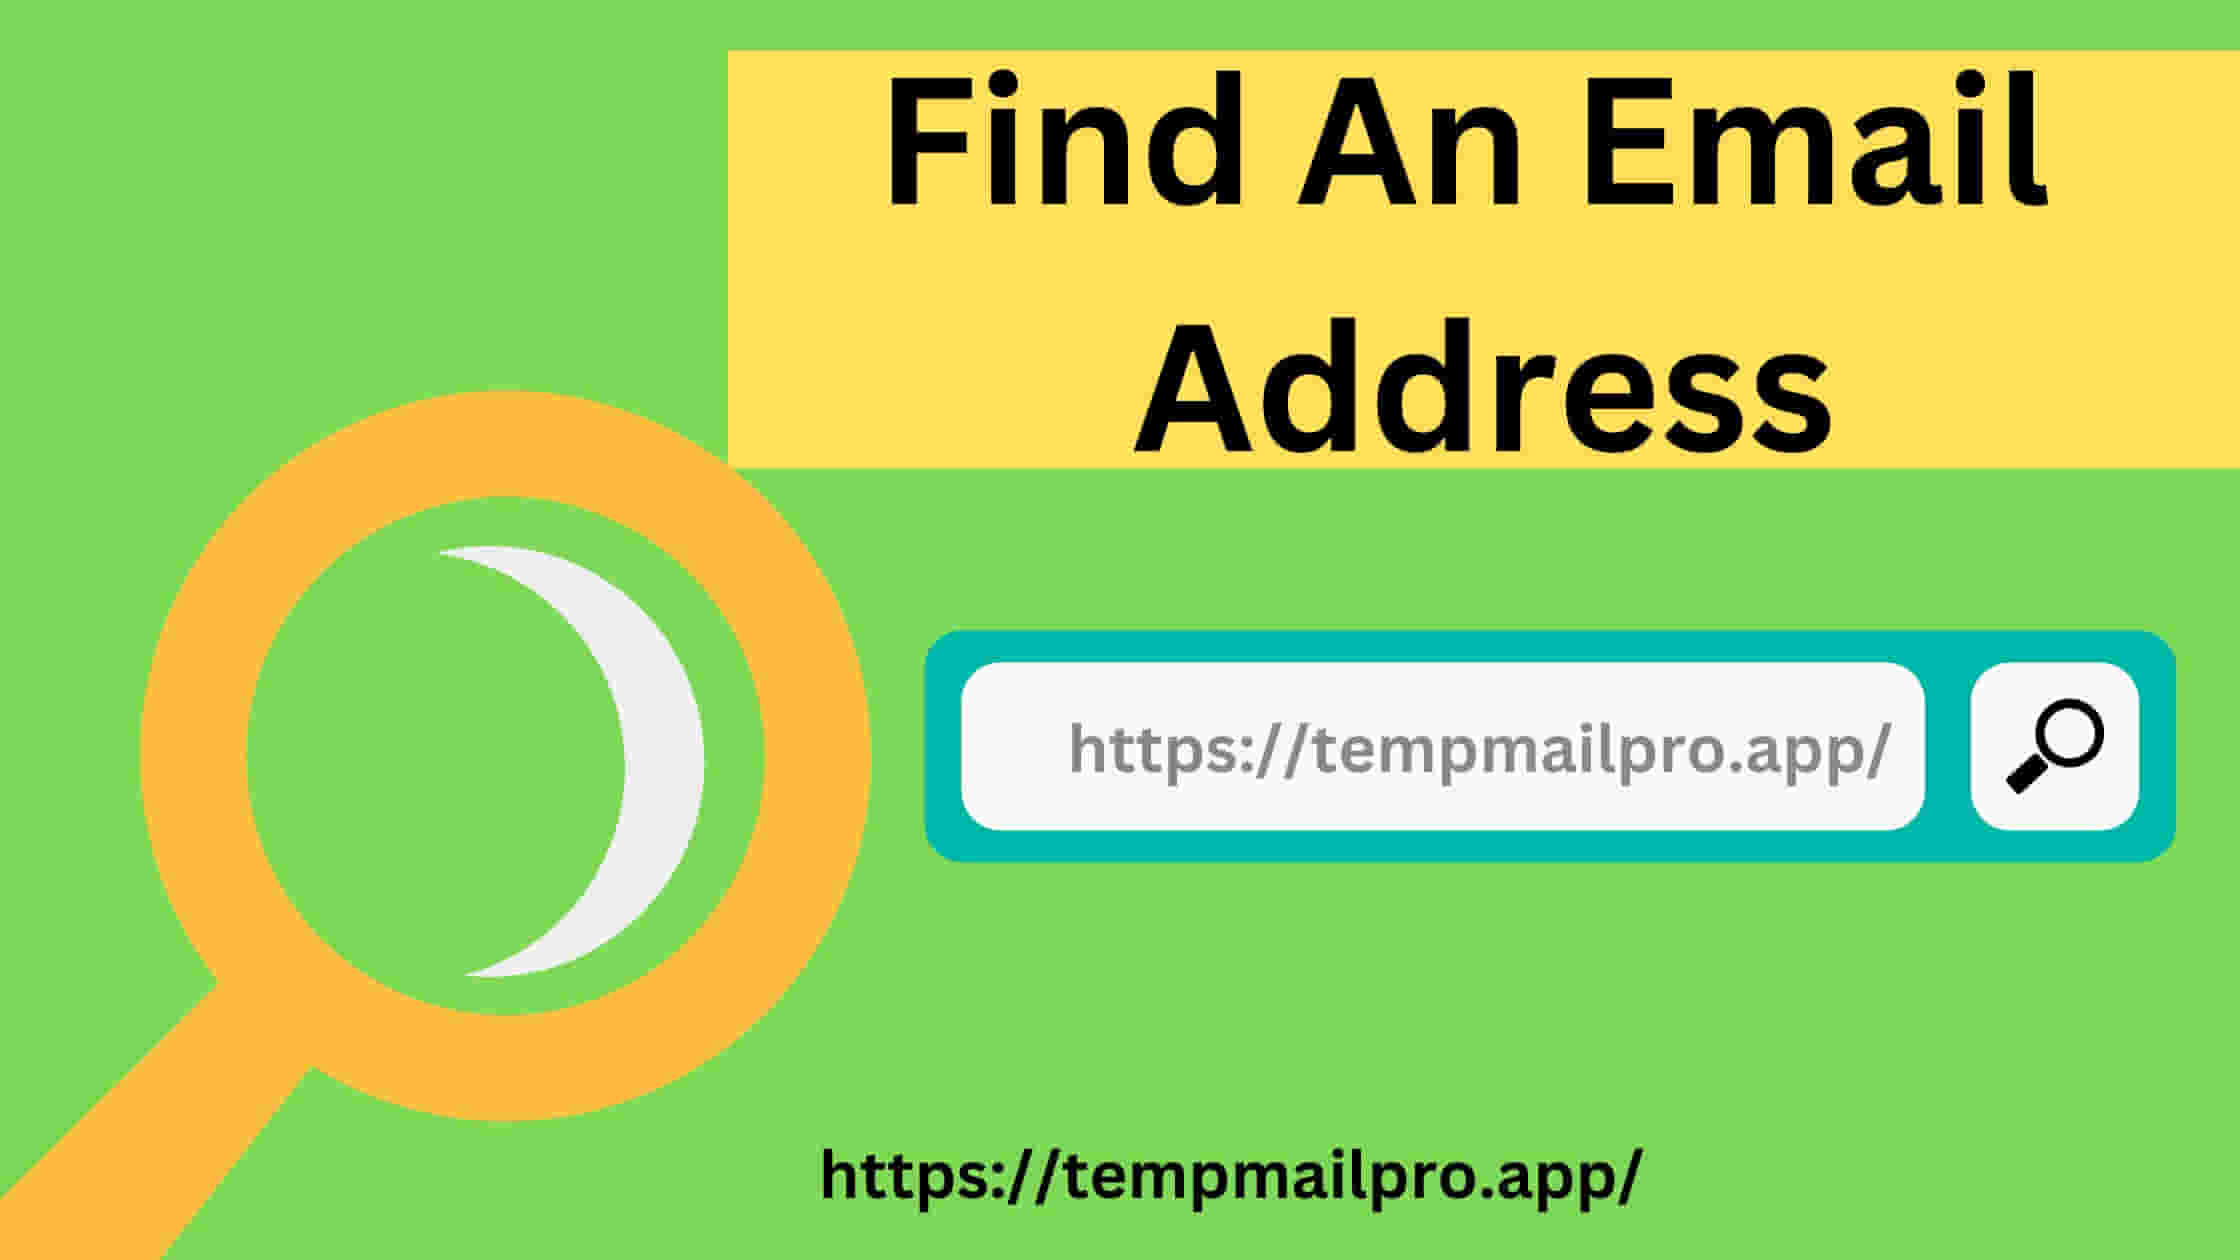 Find An Email Address in Less Than 5 Minutes [TESTED]